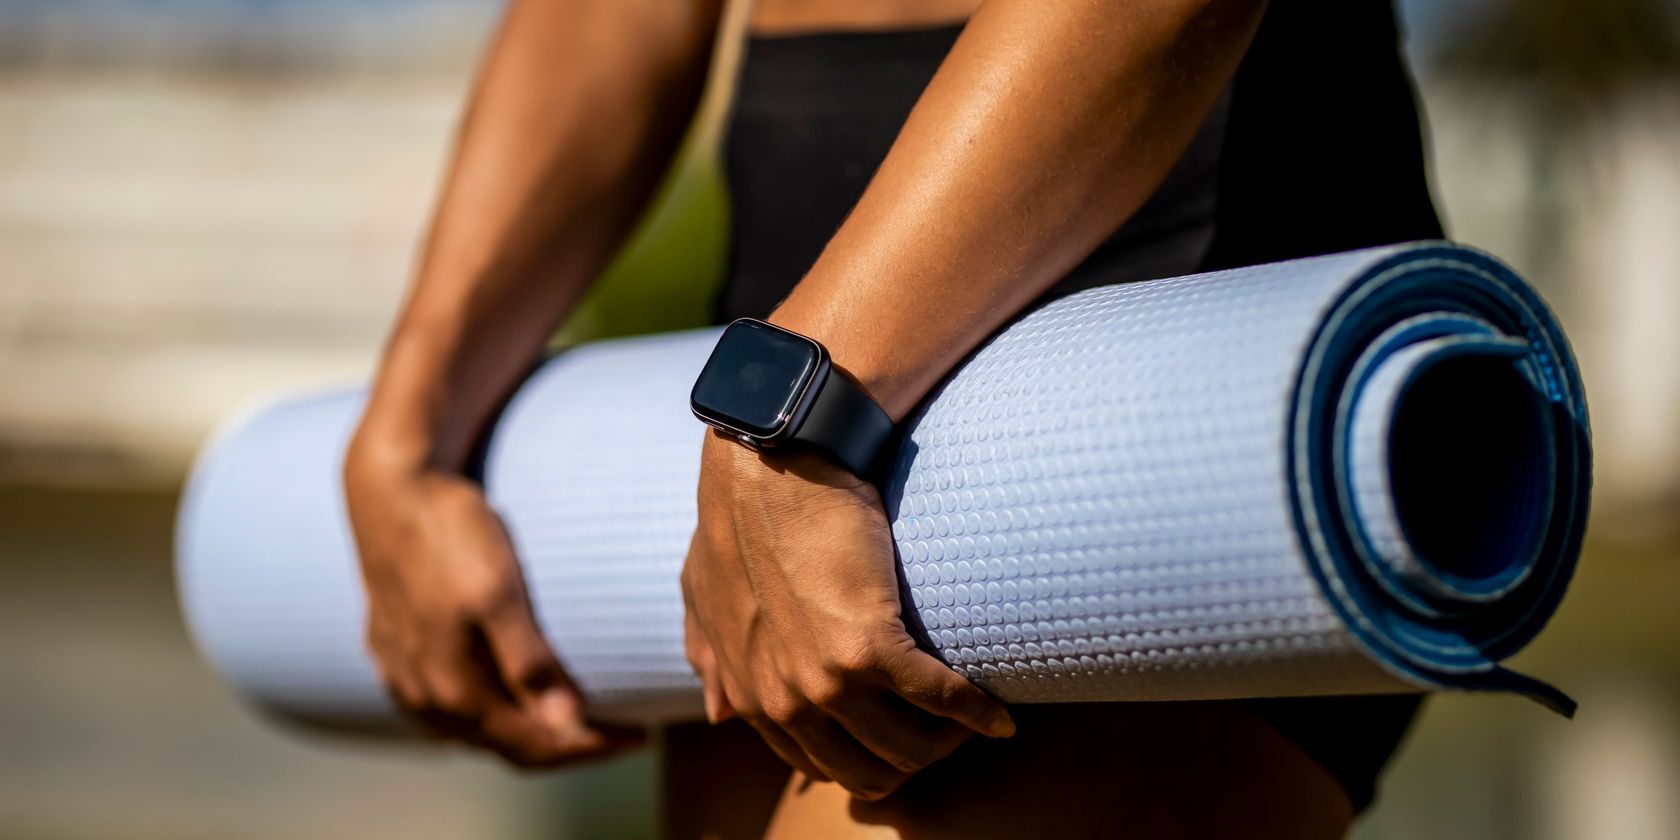 A person in black shorts wearing an Apple Watch holds a rolled up yoga mat